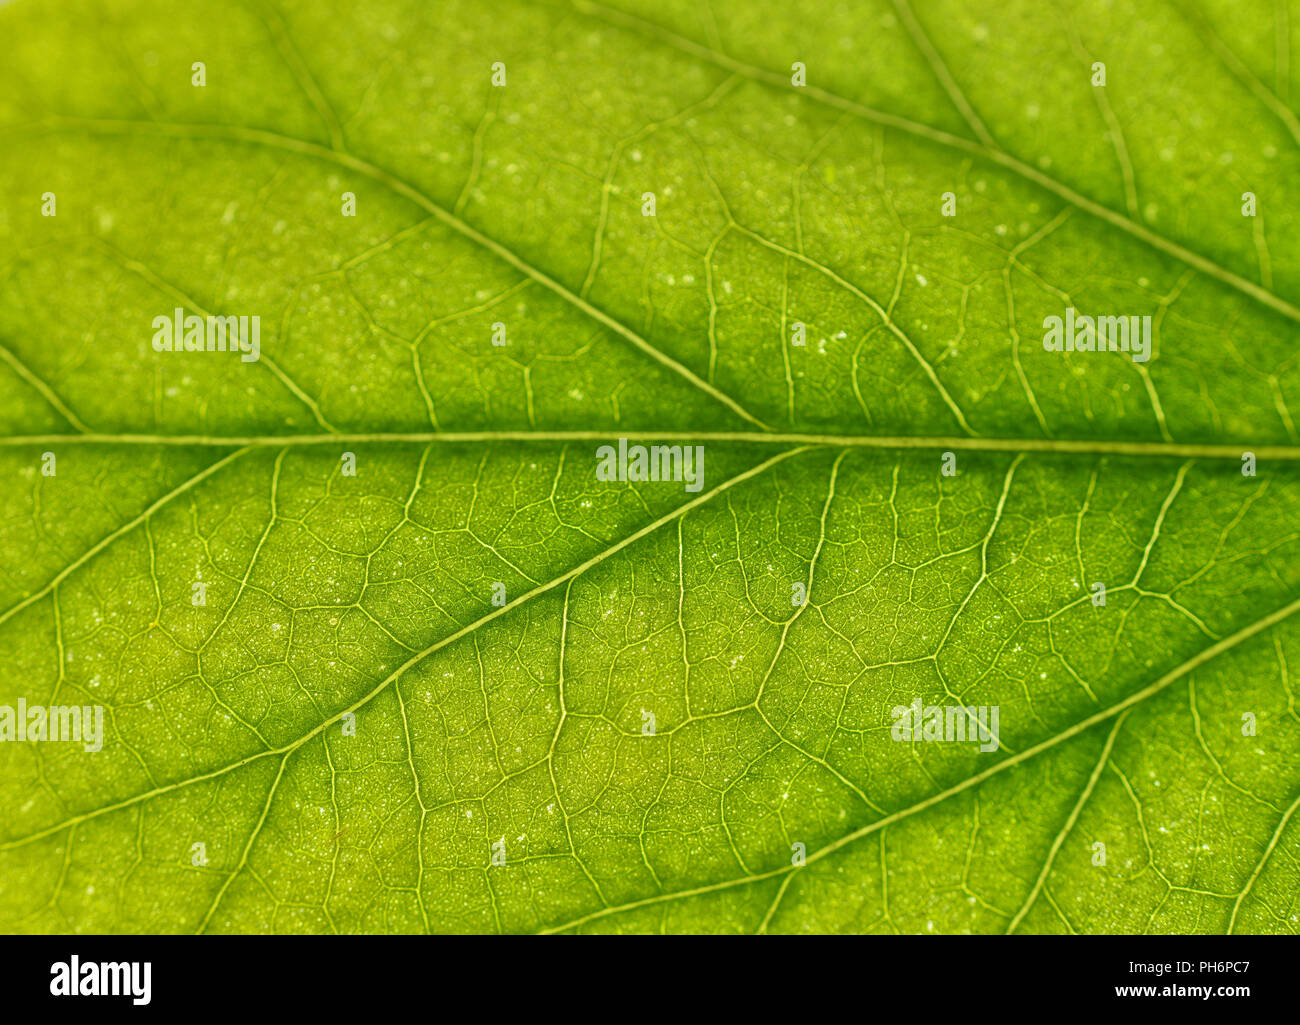 Green Leaf Background Stock Photo, Picture and Royalty Free Image. Image  17693749.